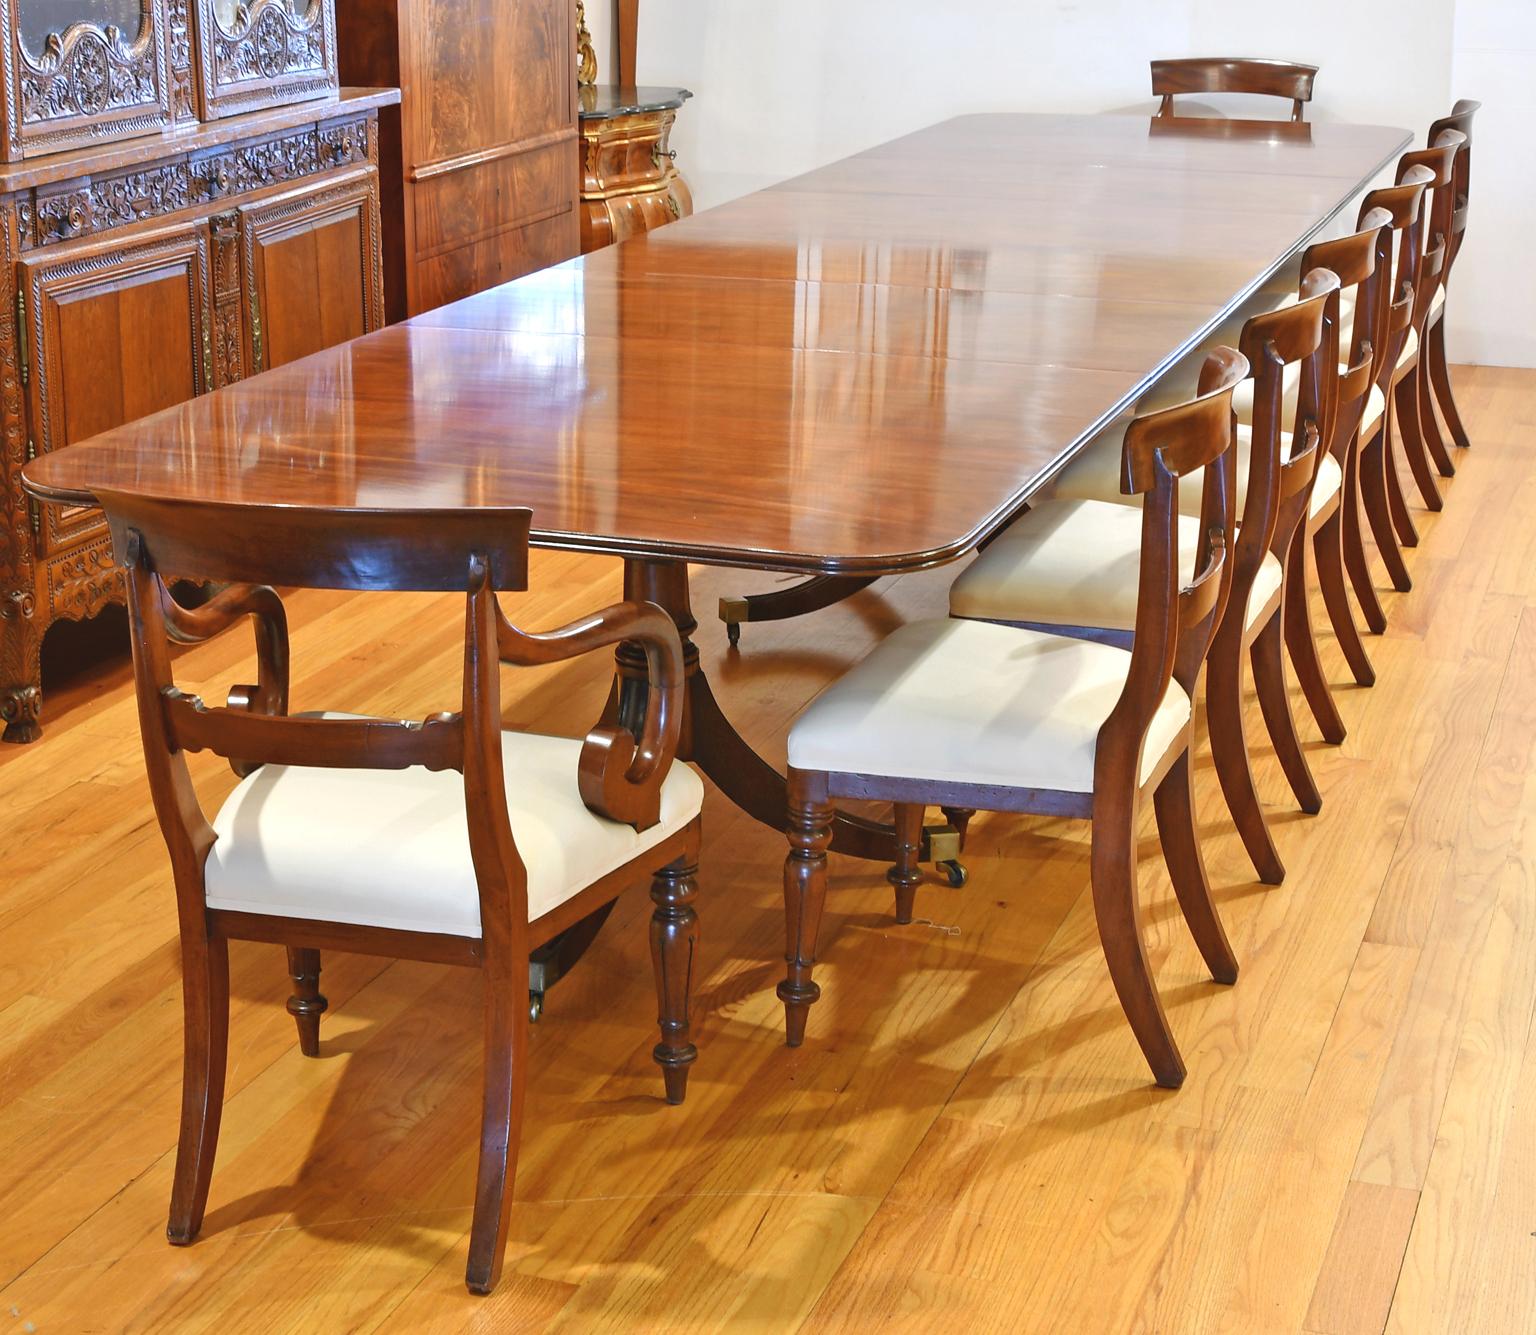 Polished 15' Antique English Banquet Dining Table in Mahogany with 3 Pedestals & 2 Leaves